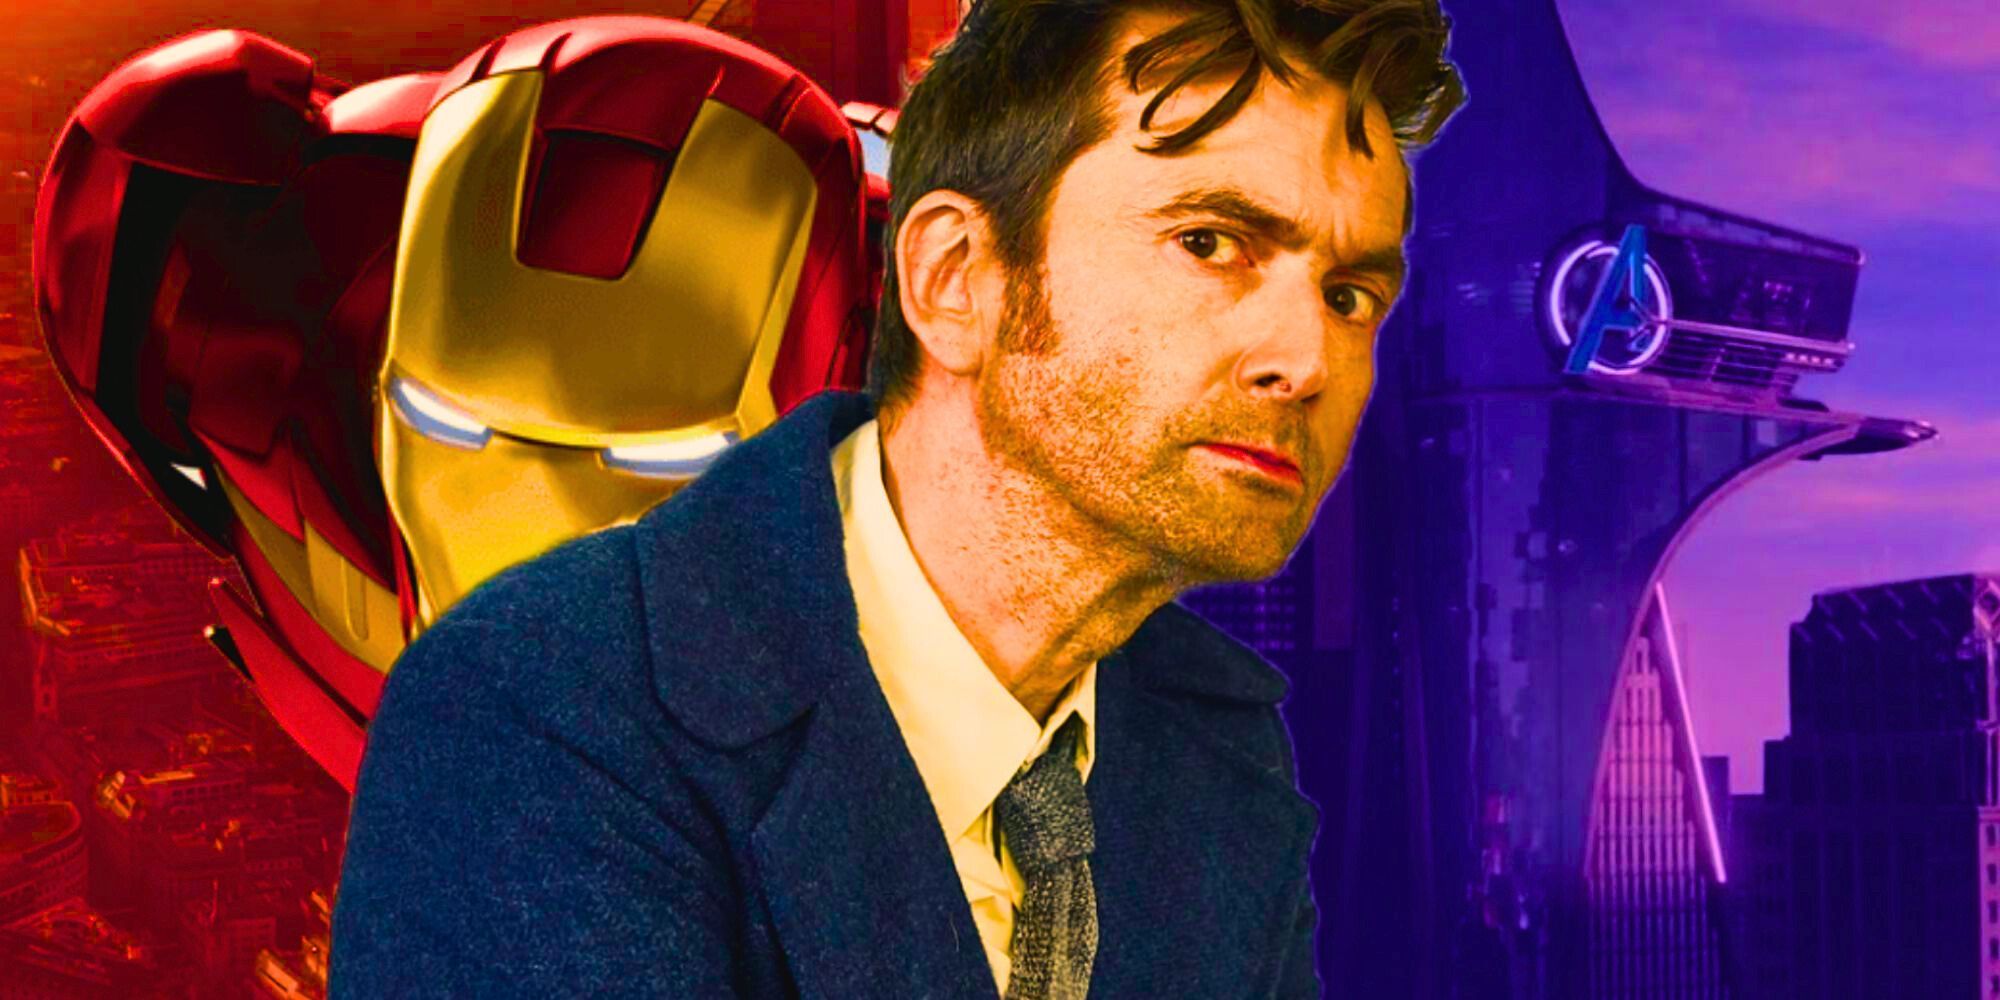 David Tennant as the Fourteenth Doctor with Iron Man and Avengers Tower behind him